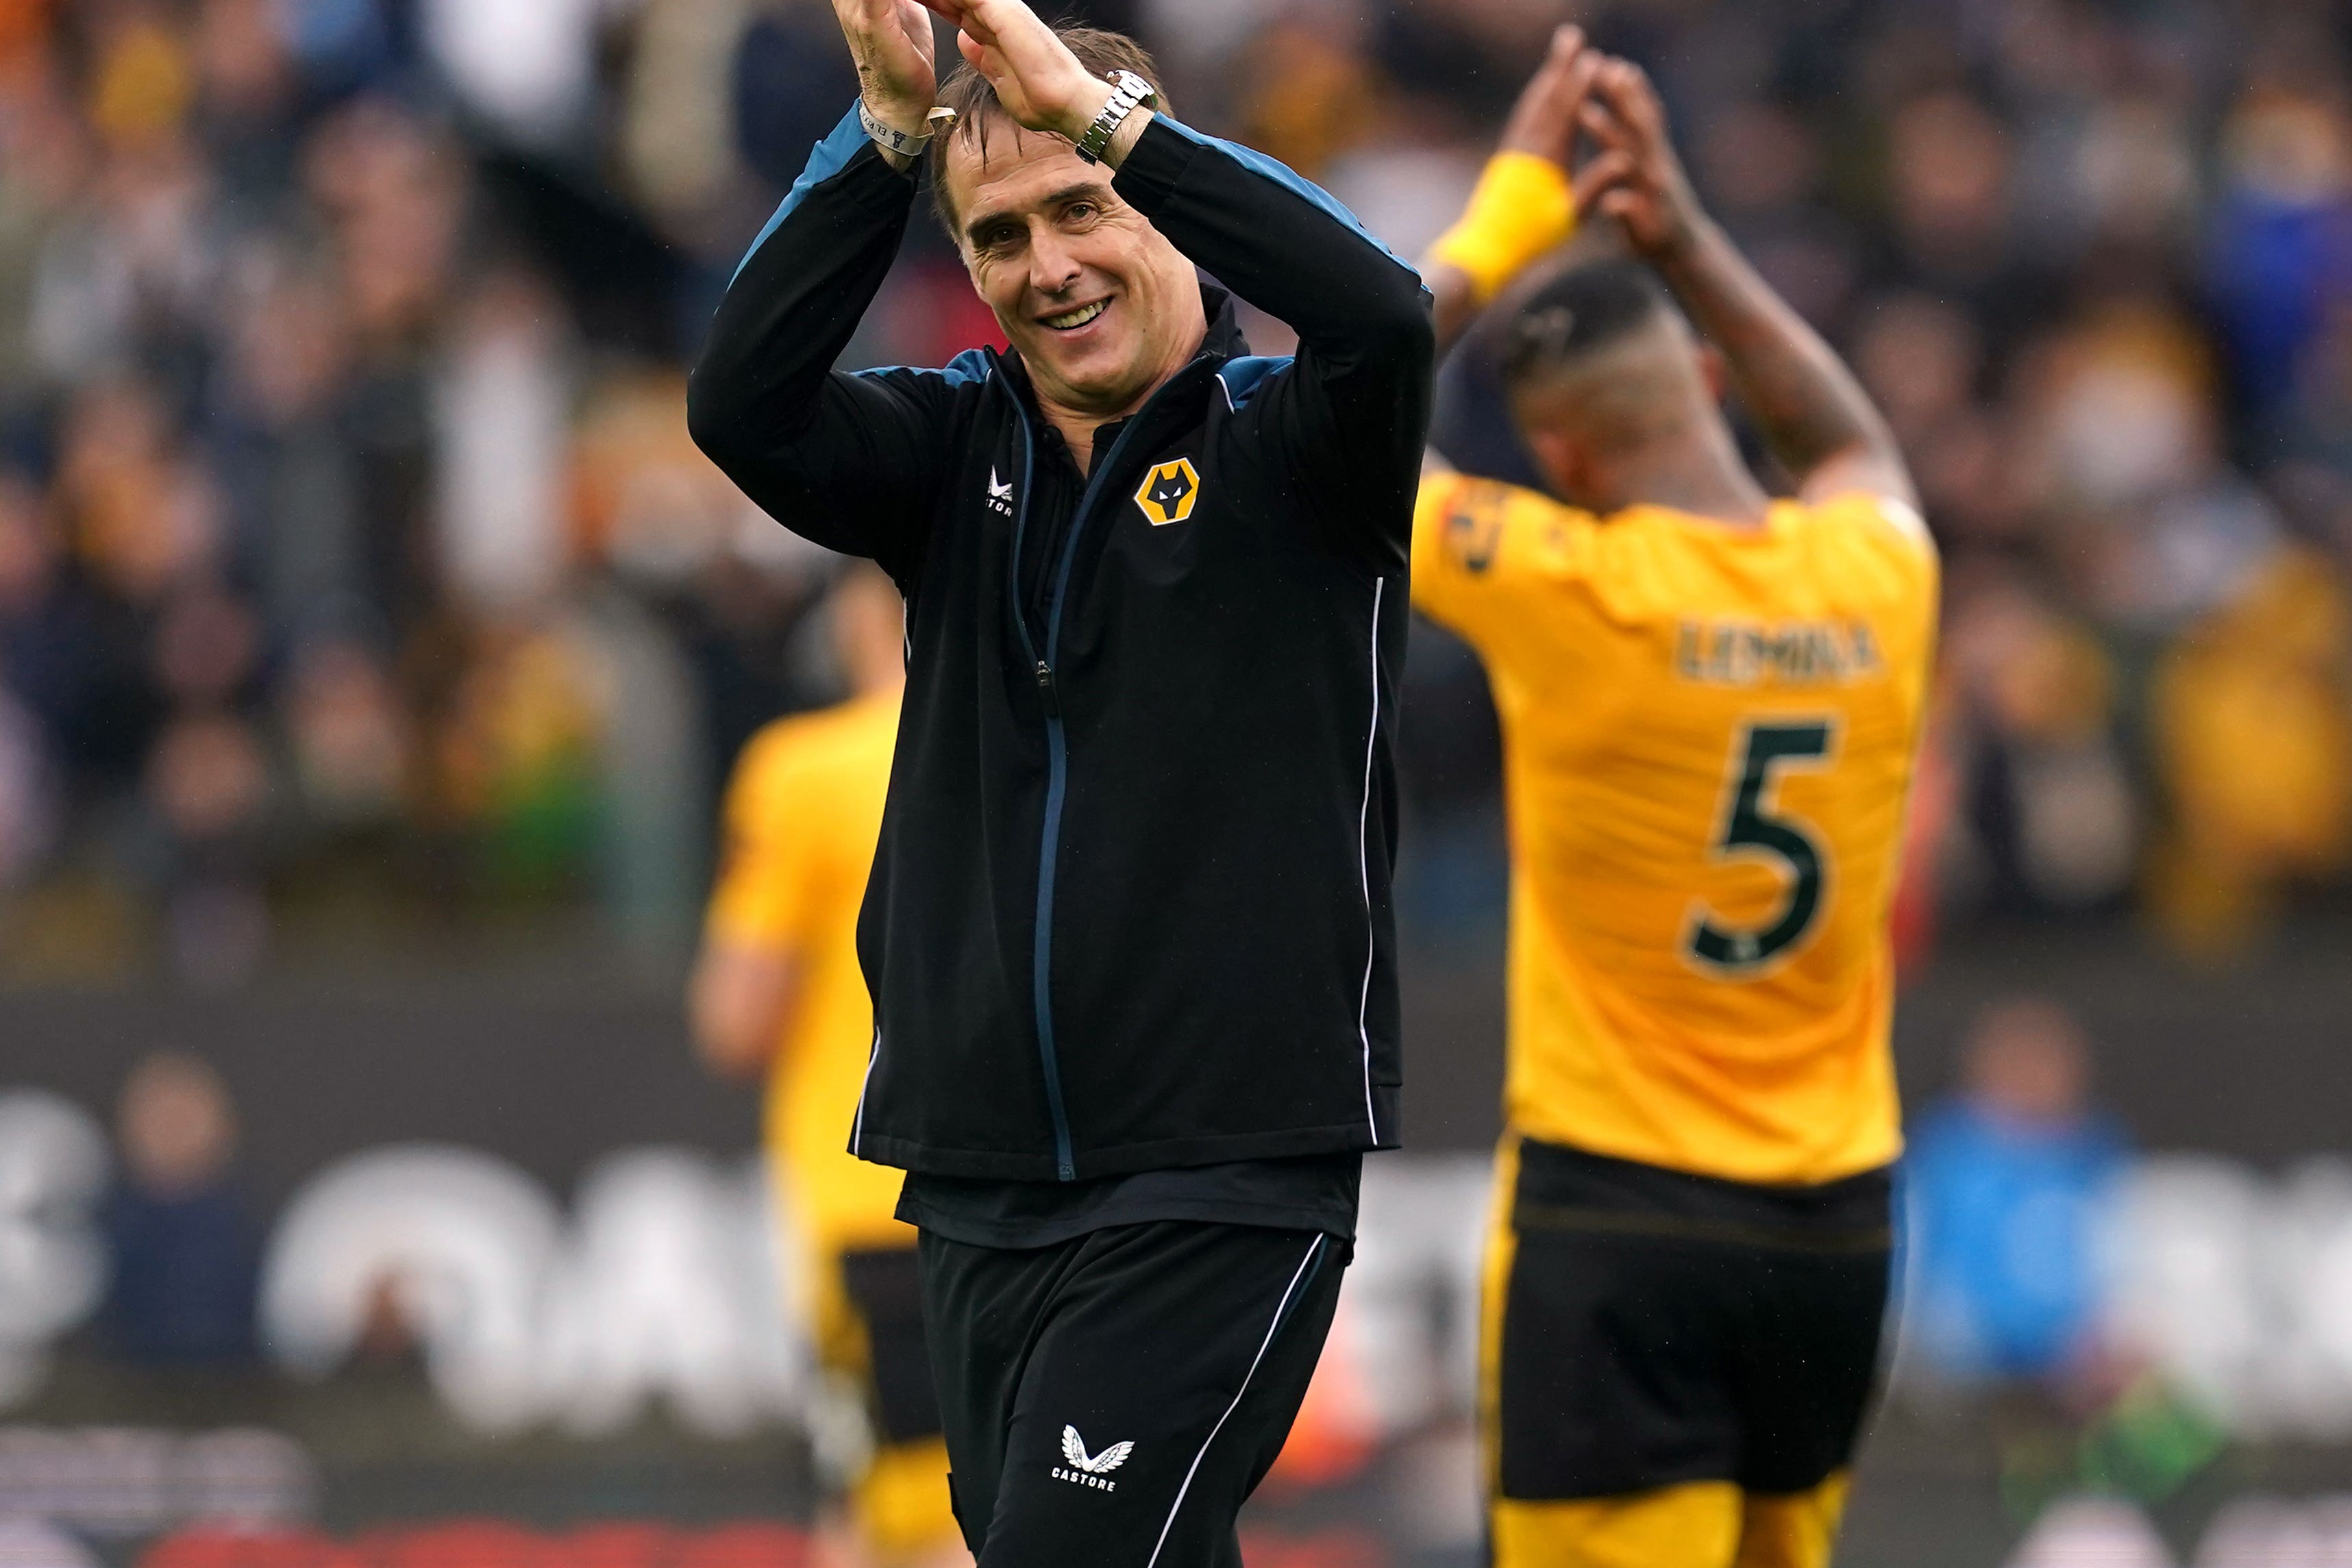 Wolves boss Lopetegui has led the club to survival